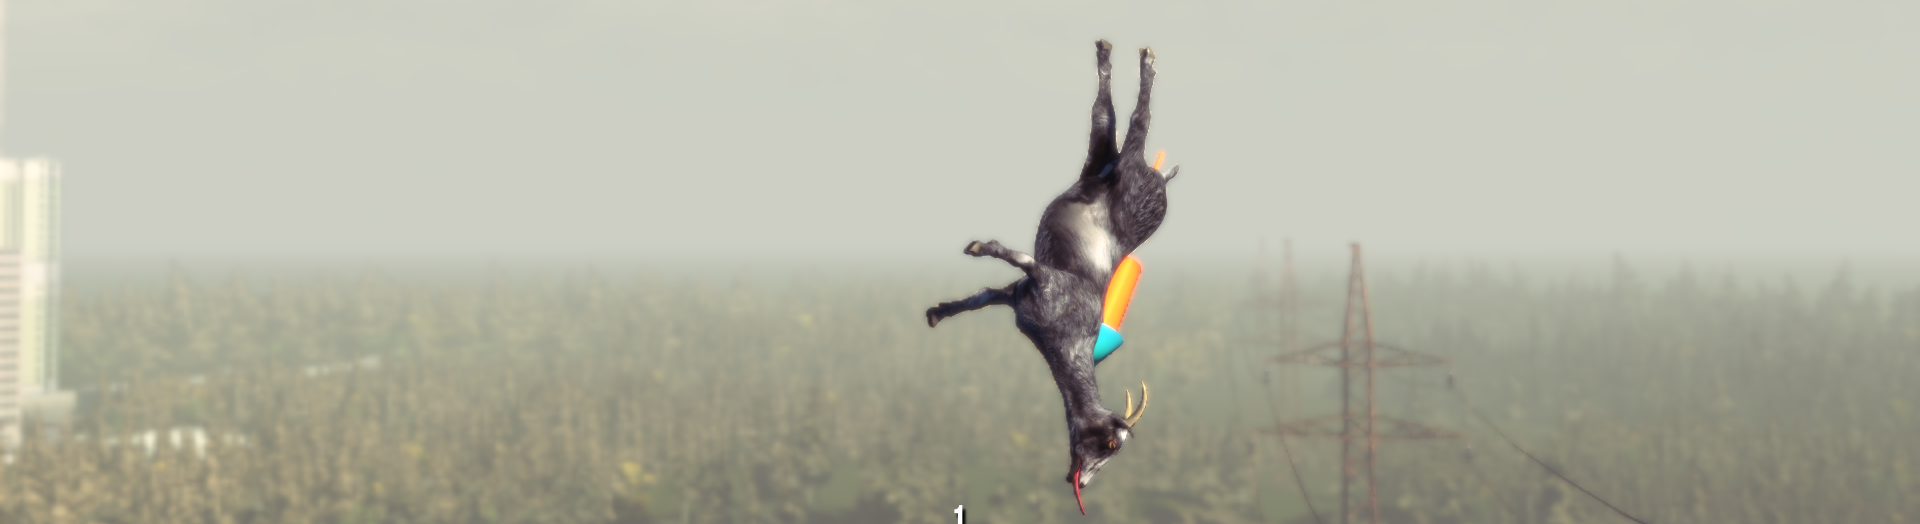 High Quality Flying Goat from Goat Sim Blank Meme Template